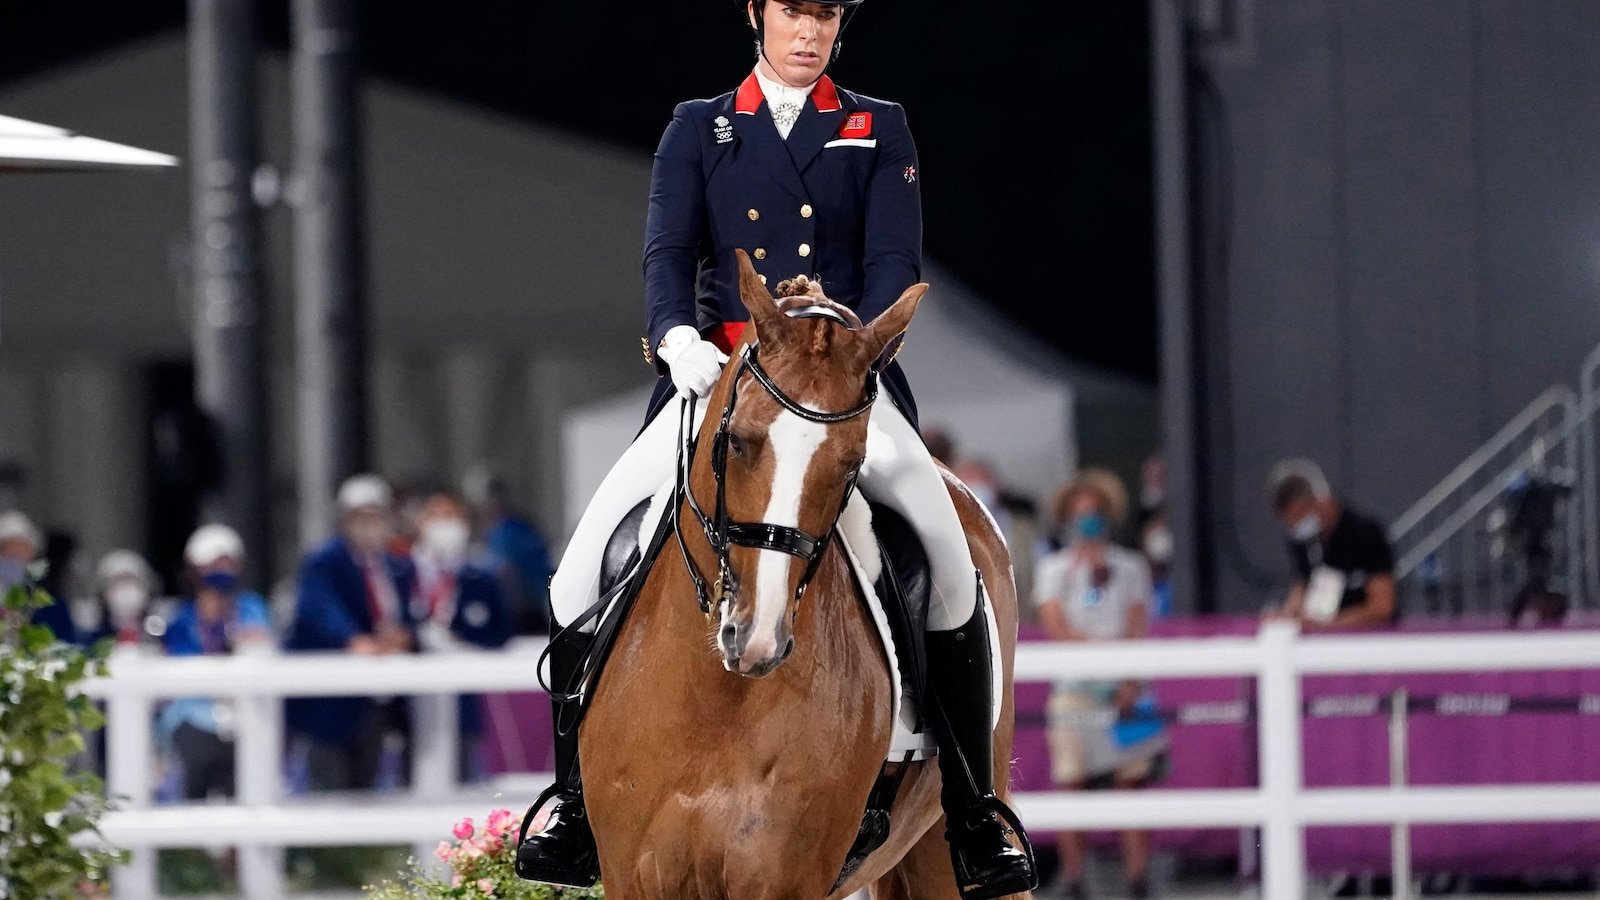 Olympic equestrian champion Charlotte Dujardin shown repeatedly whipping horse on video